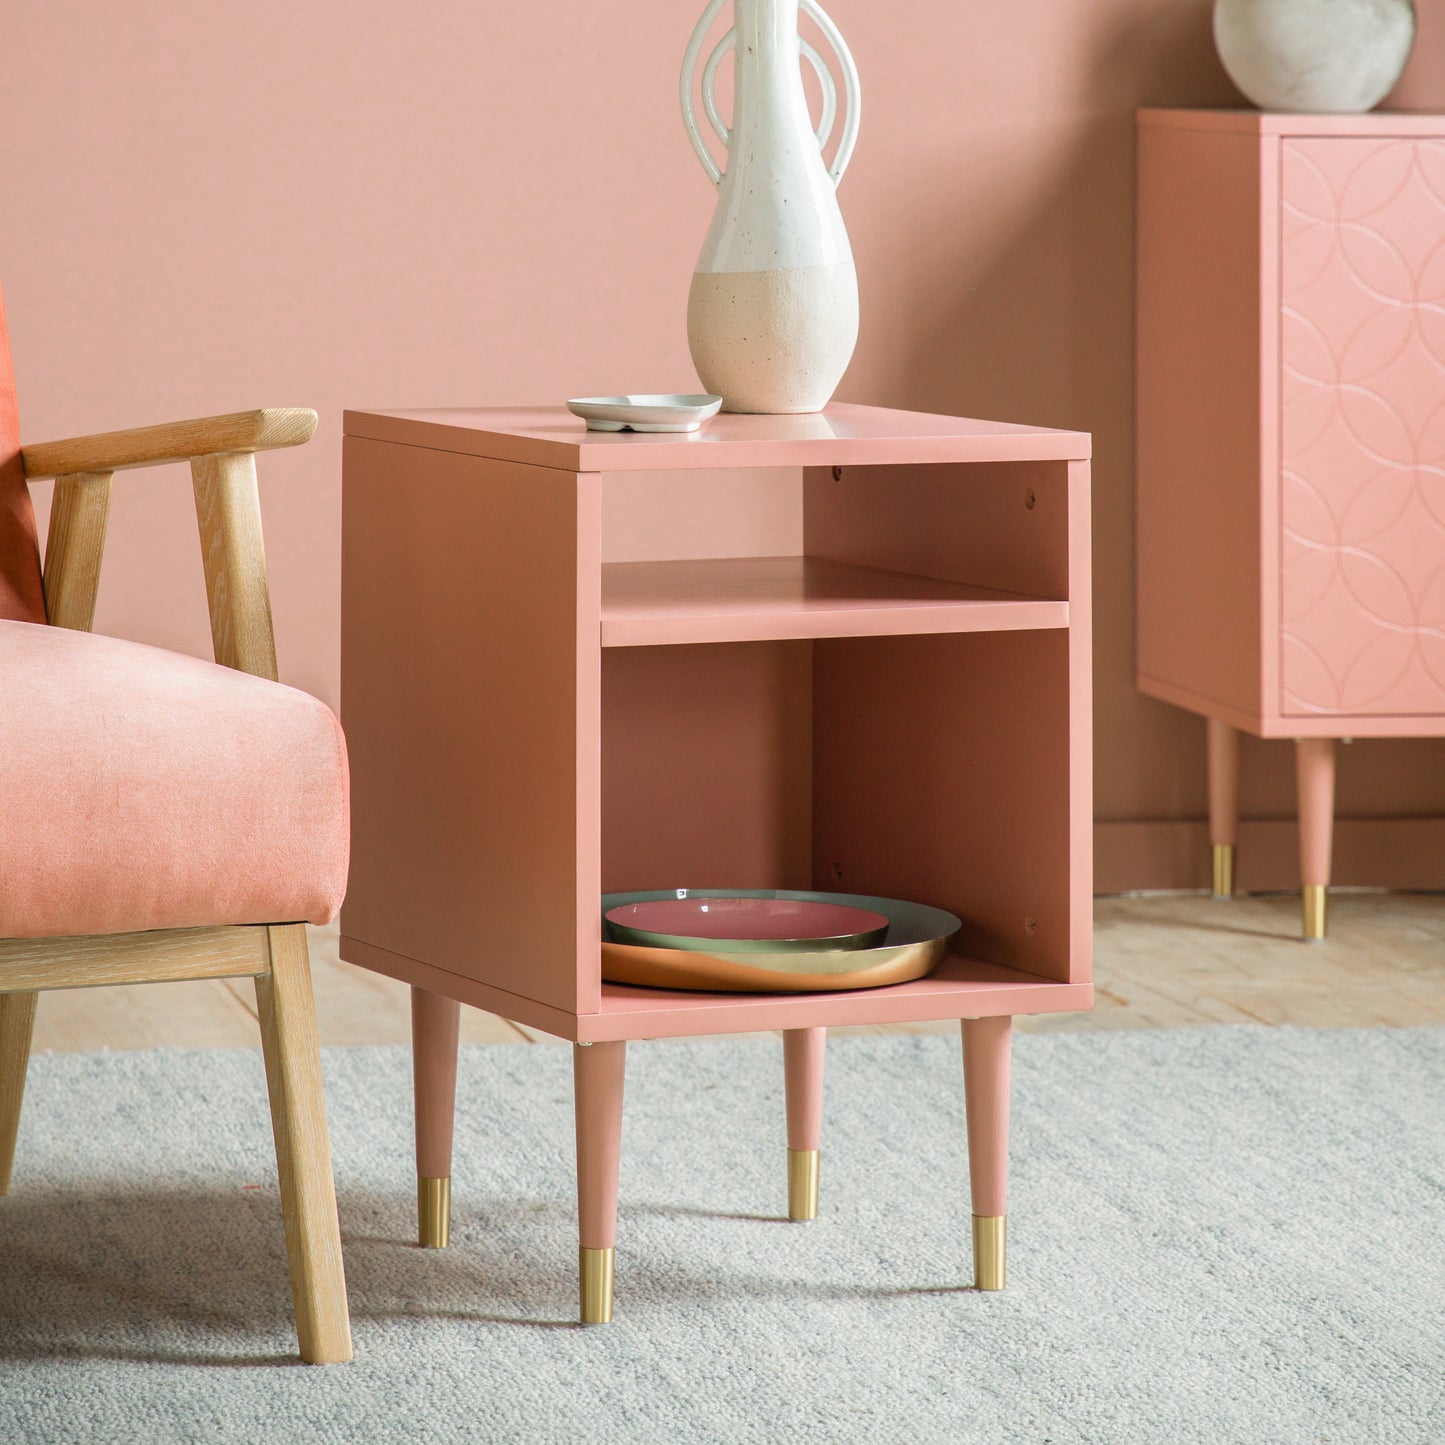 A Thurlestone Side Table Pink 400x400x600mm by Kikiathome.co.uk adding to home furniture and interior decor.